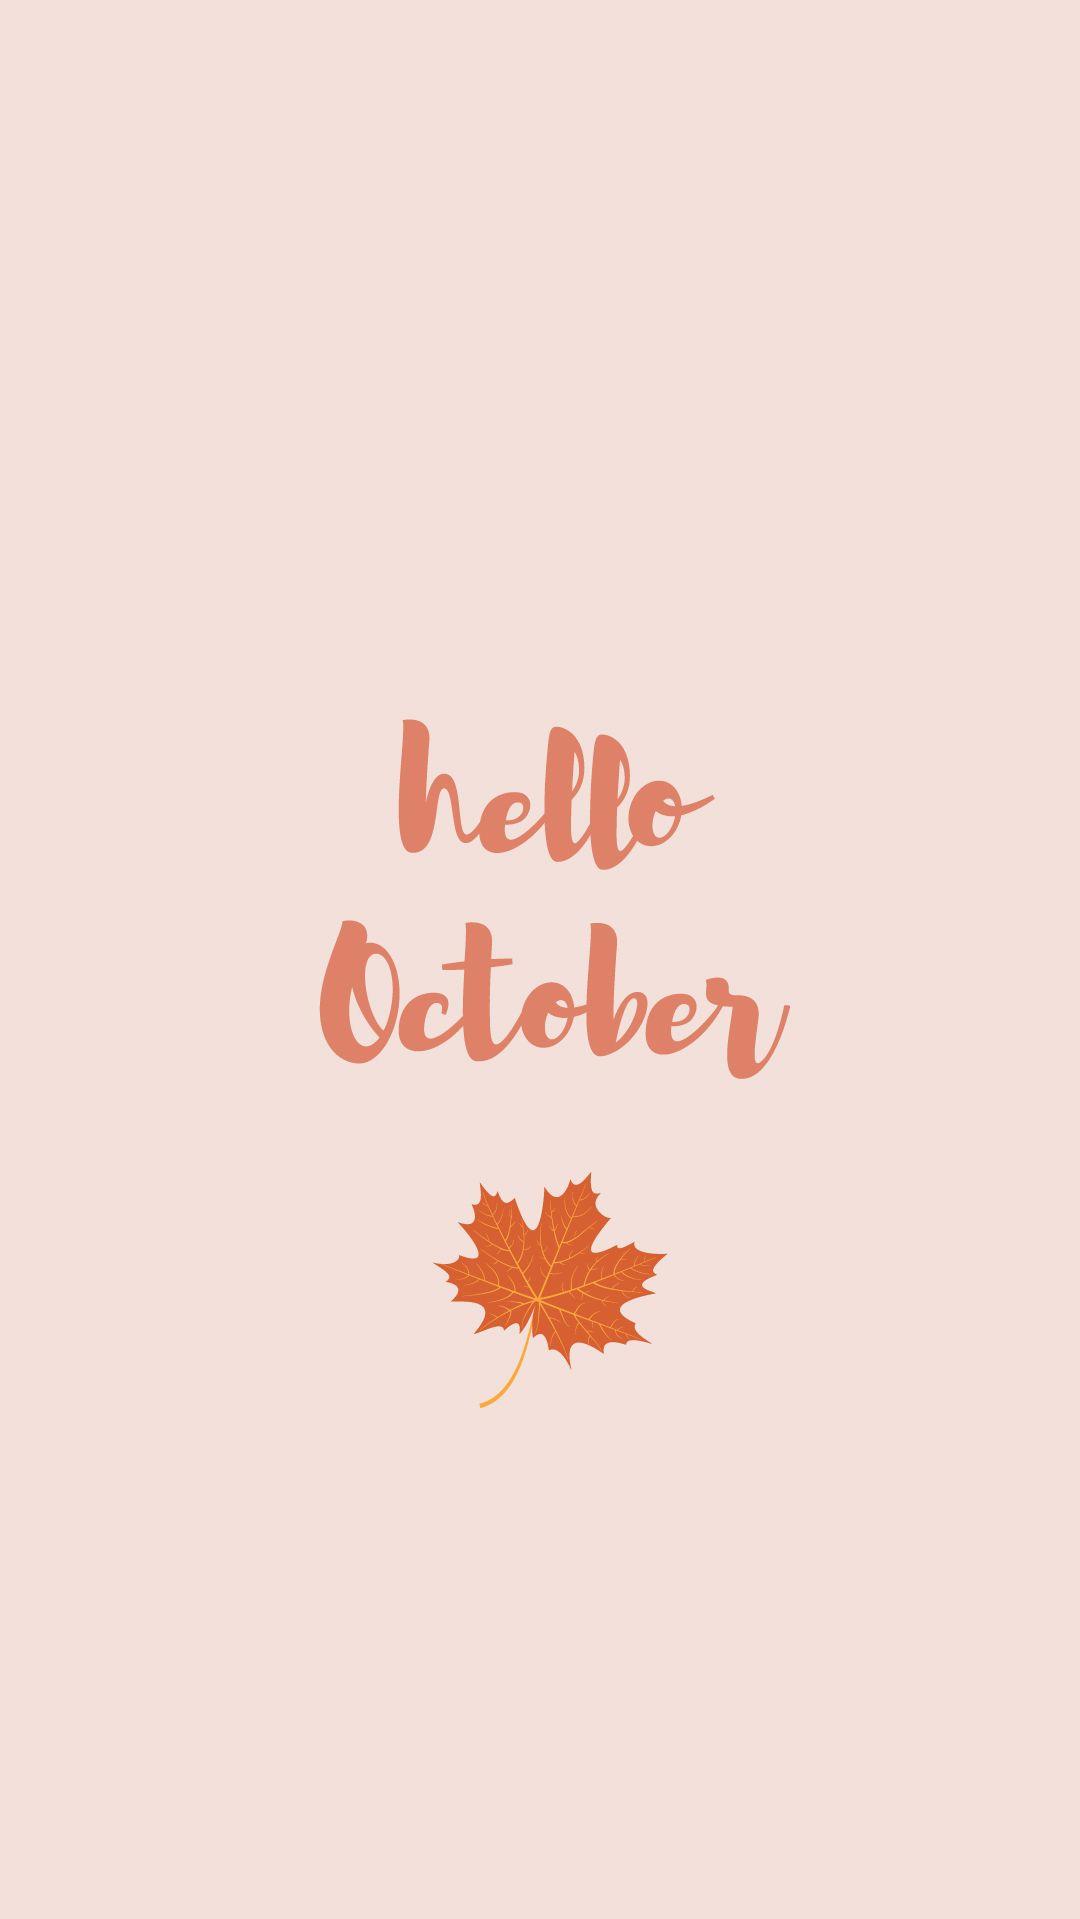 Hello October mobile wallpaper for iPhone and Android October